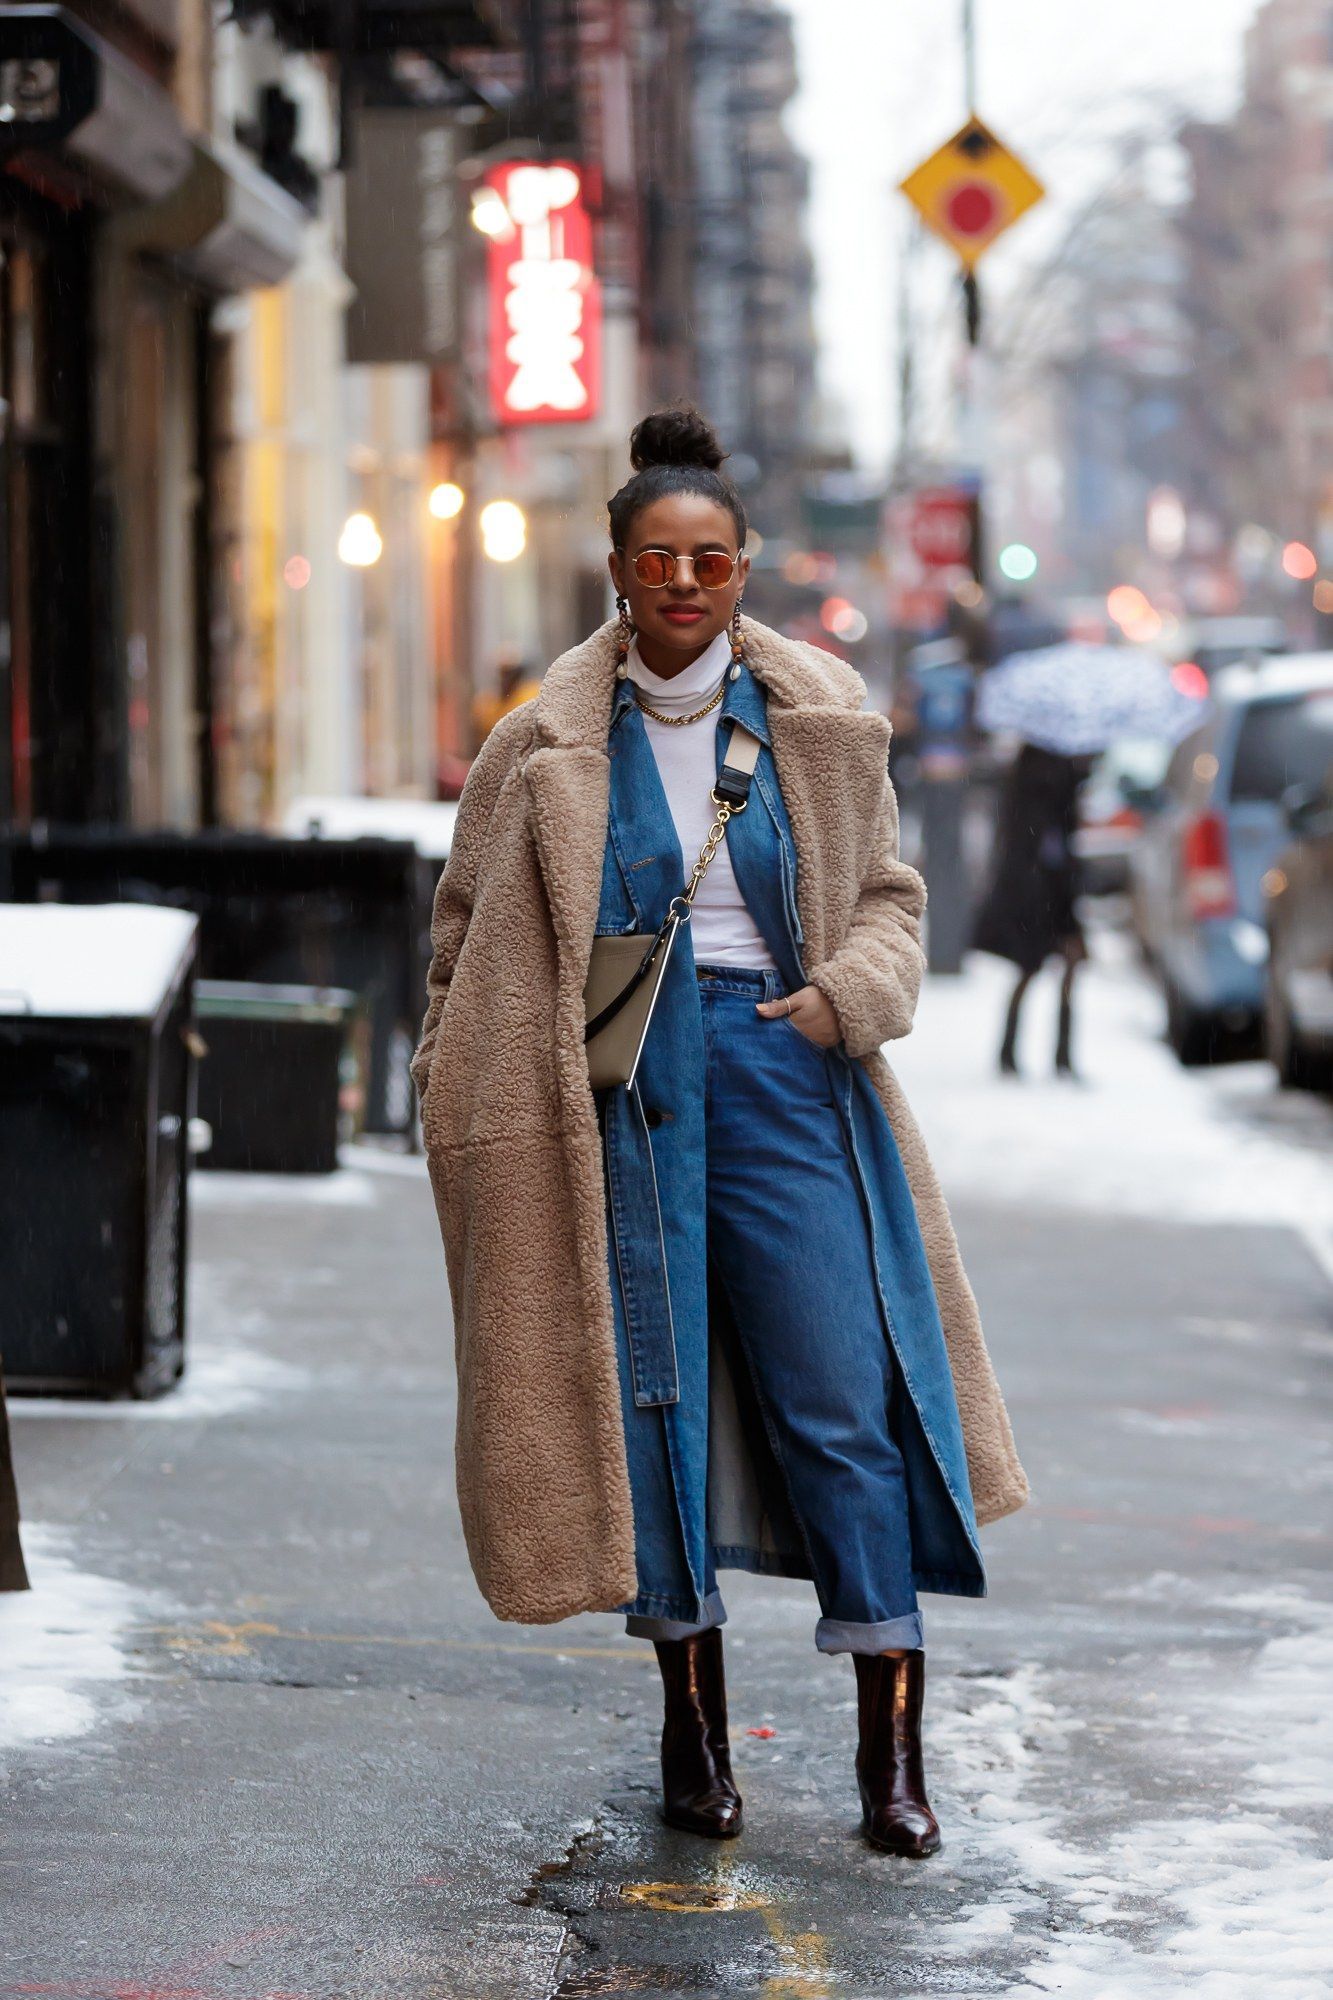 The Diverse Street Style Roundup You've Been Waiting For - The Diverse Street Style Roundup You've Been Waiting For -   15 style Edgy winter ideas